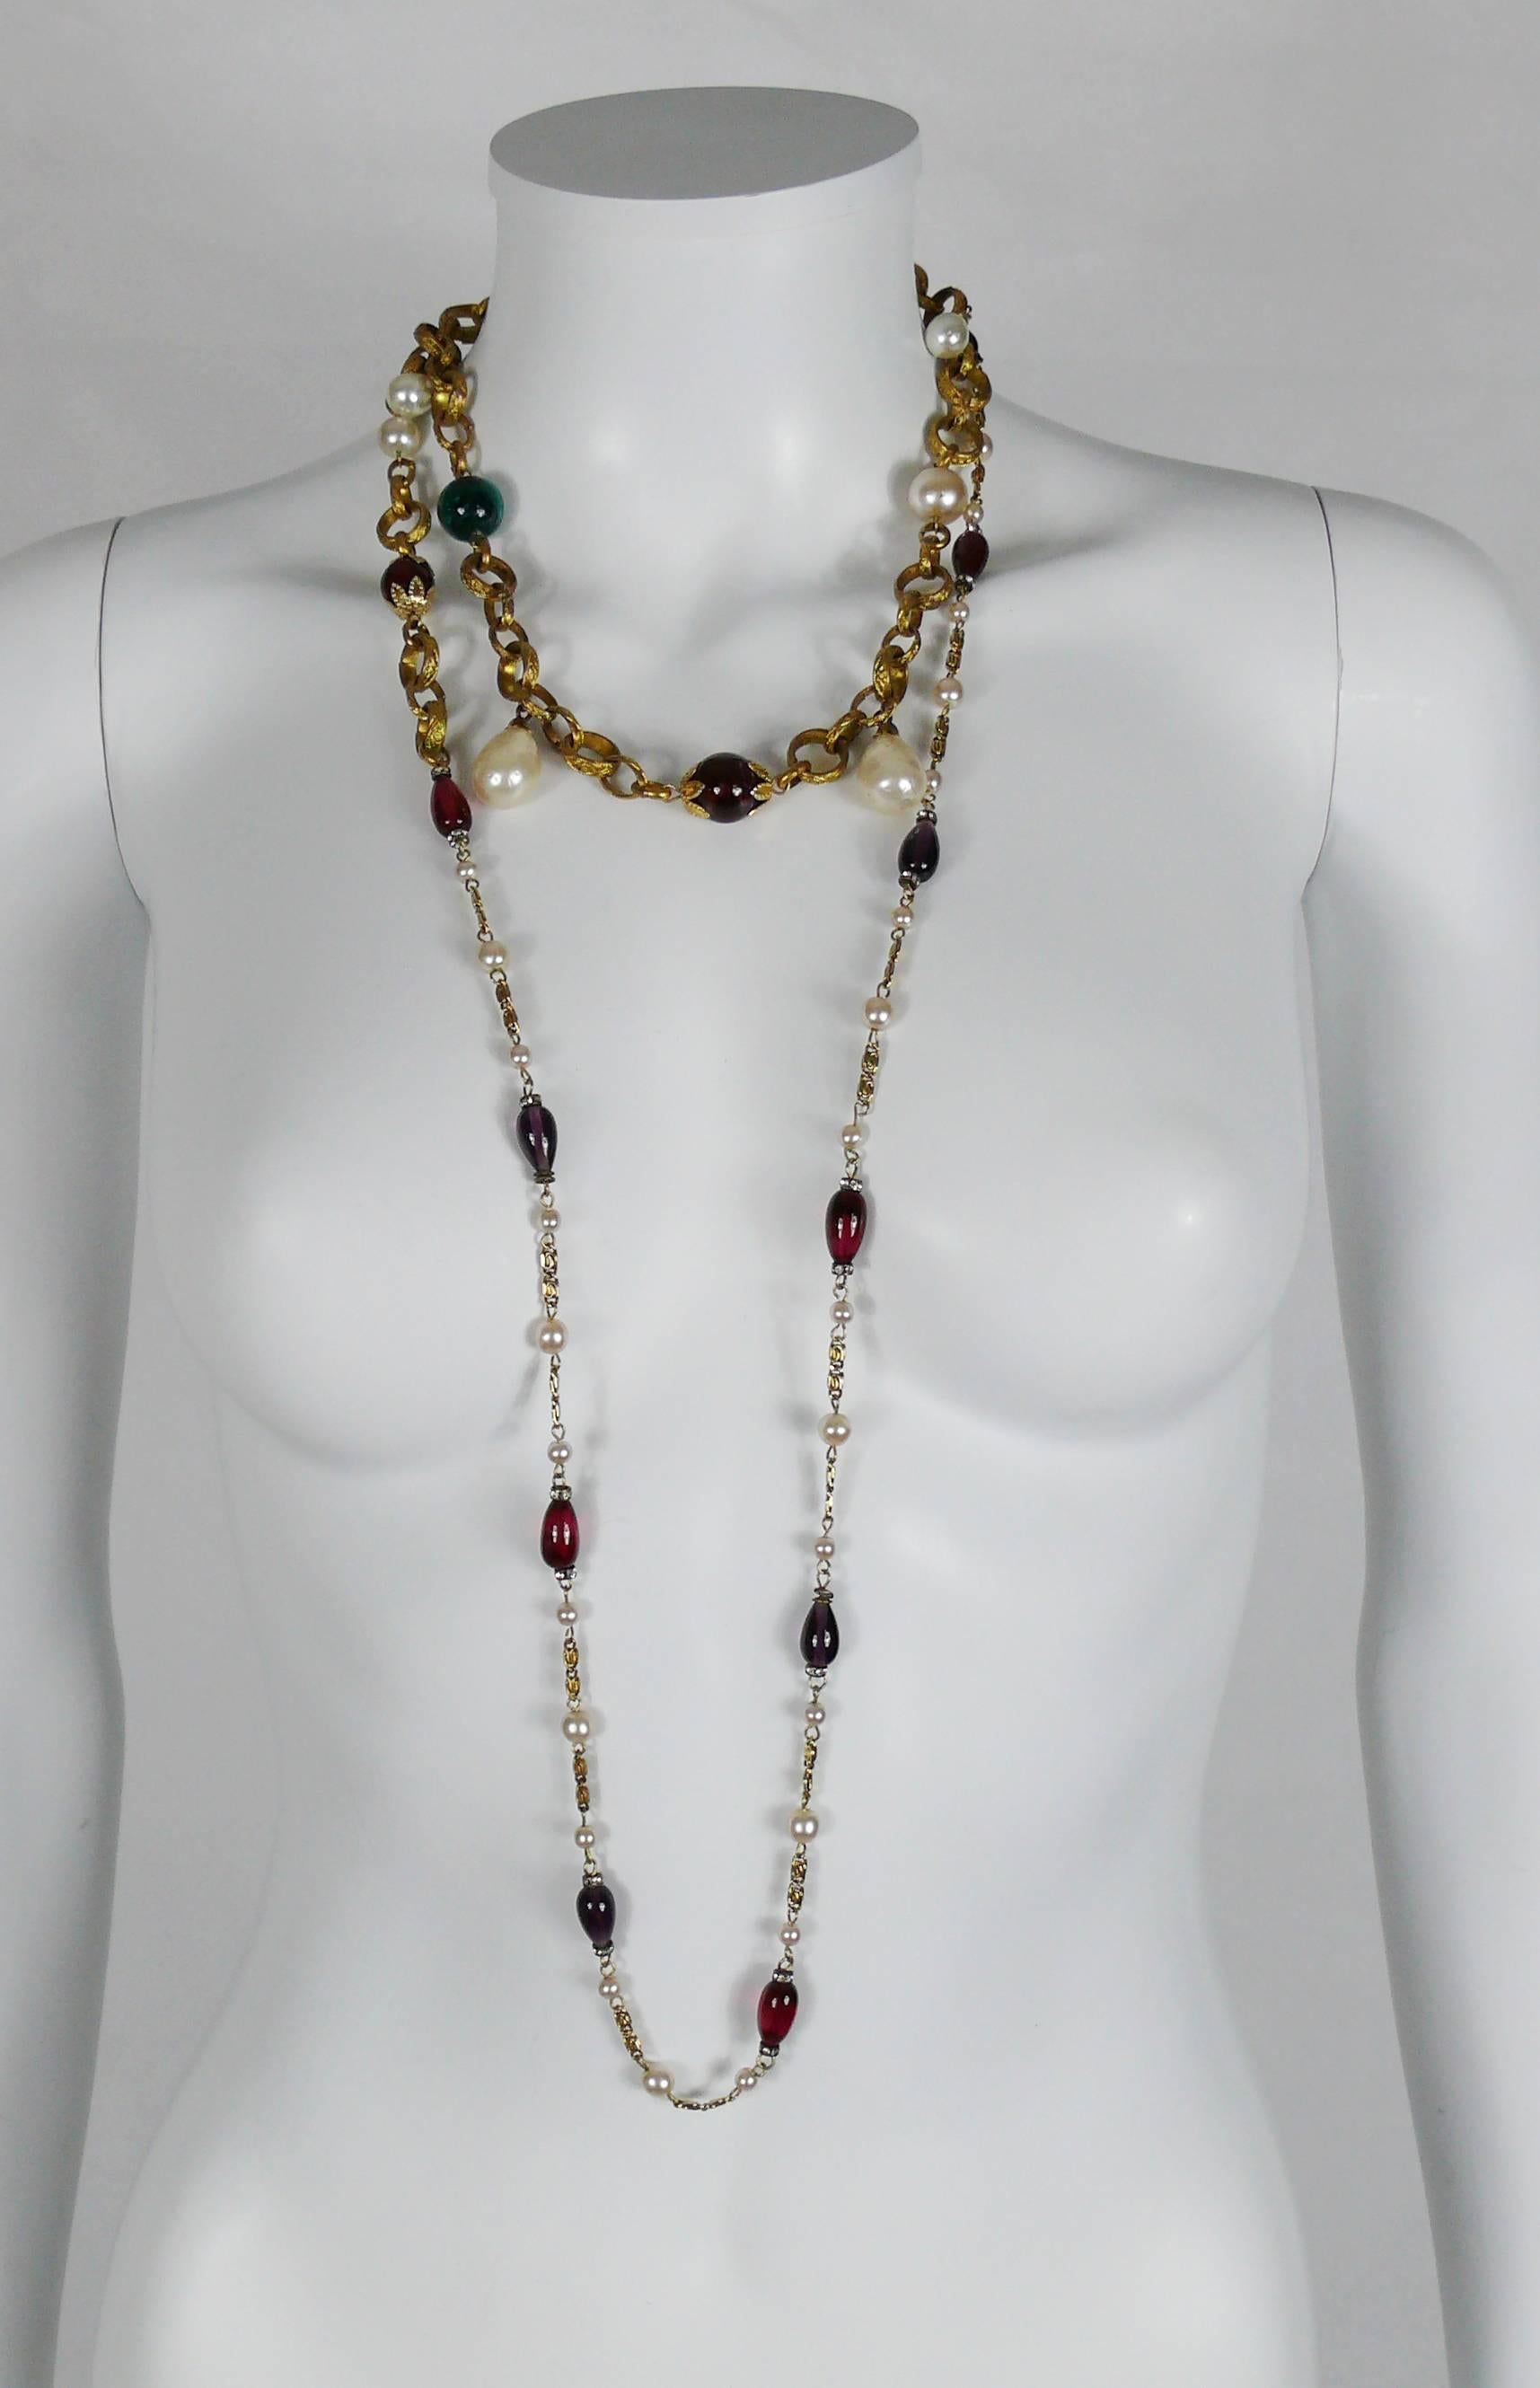 YVES SAINT LAURENT vintage rare 1970's two tiered sautoir necklace featuring a gold tone chain with textured links, faux pearls, red-green-purple GRIPOIX glass cabochons.

Model variant sold at Cornette de Saint Cyr Paris auction on the 13th of